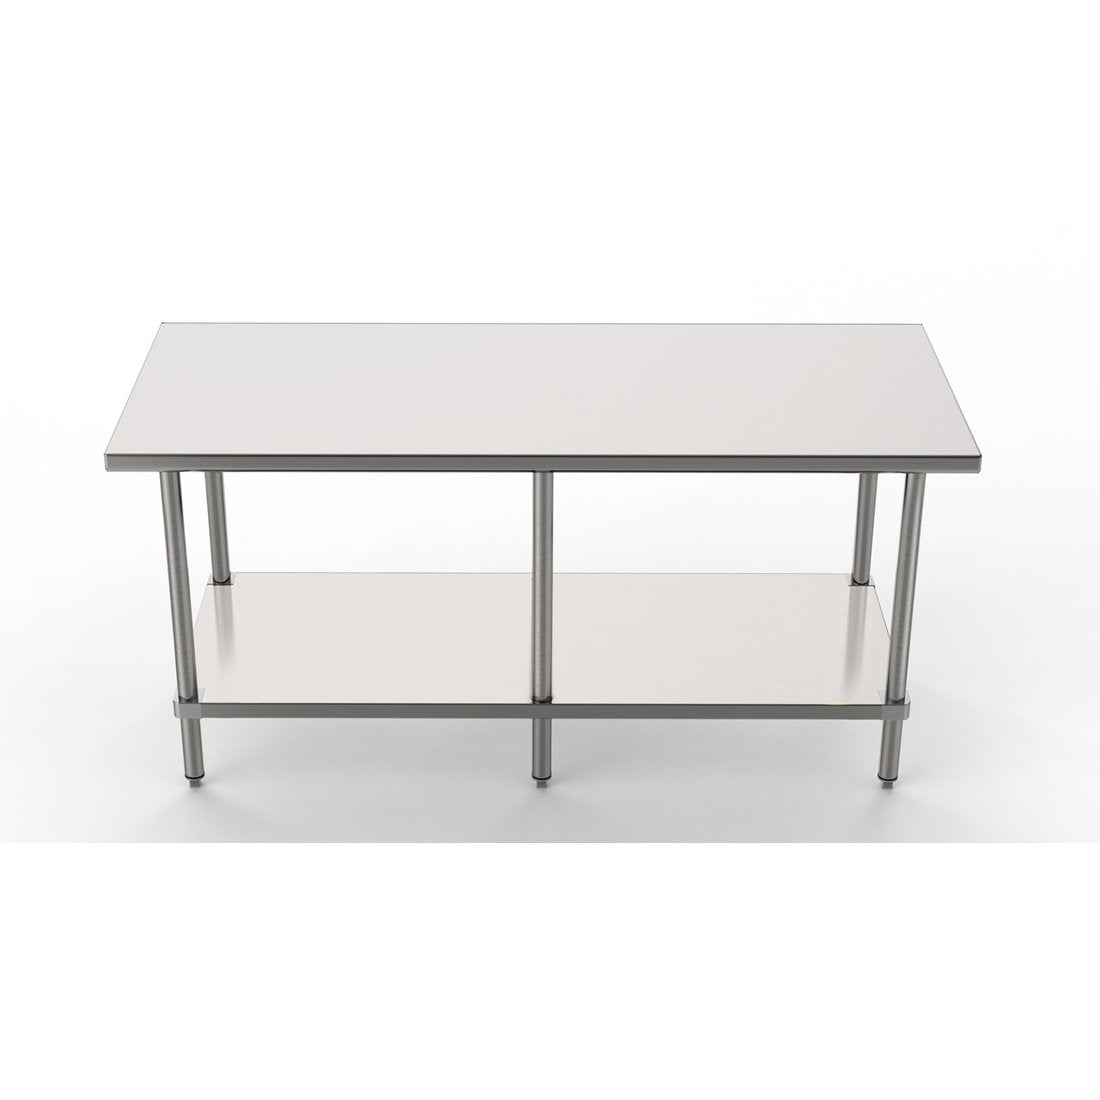 GSW Commercial Grade Flat Top Work Table with Stainless Steel Top, Galvanized Undershelf & Legs, Adjustable Bullet Feet, Perfect for Restaurant, Home, Office, Kitchen or Garage, NSF Approved (18"W x 72"L x 35"H)